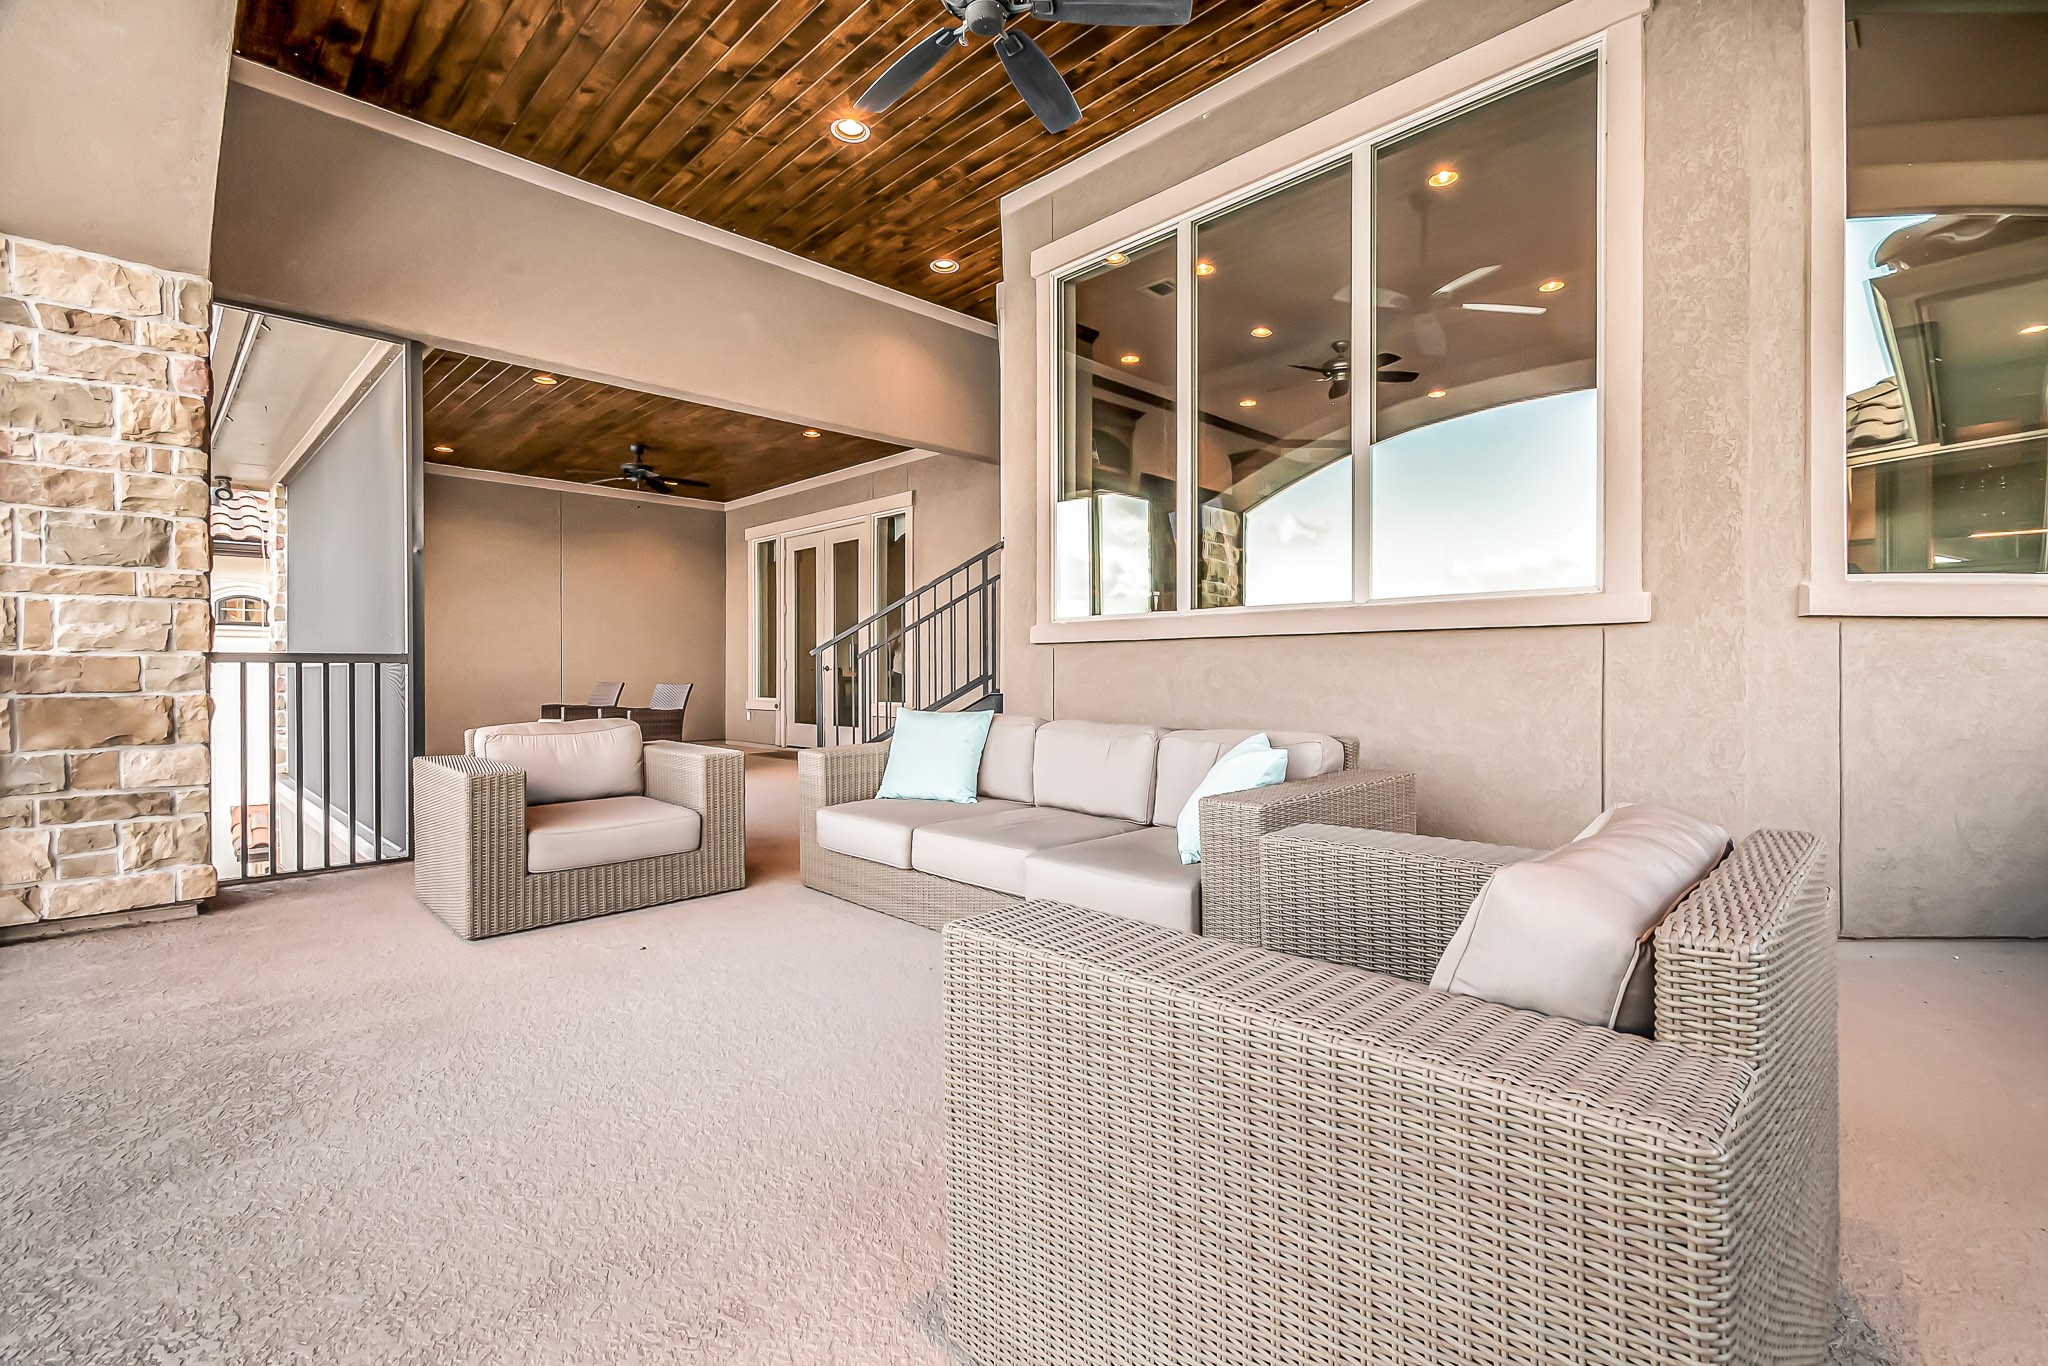 The second floor balcony provides several seating areas and is screened in for an enjoyable outdoor experience. Wood plank ceiling adds to the custom design of this home. Access this balcony from the game room or second floor office.